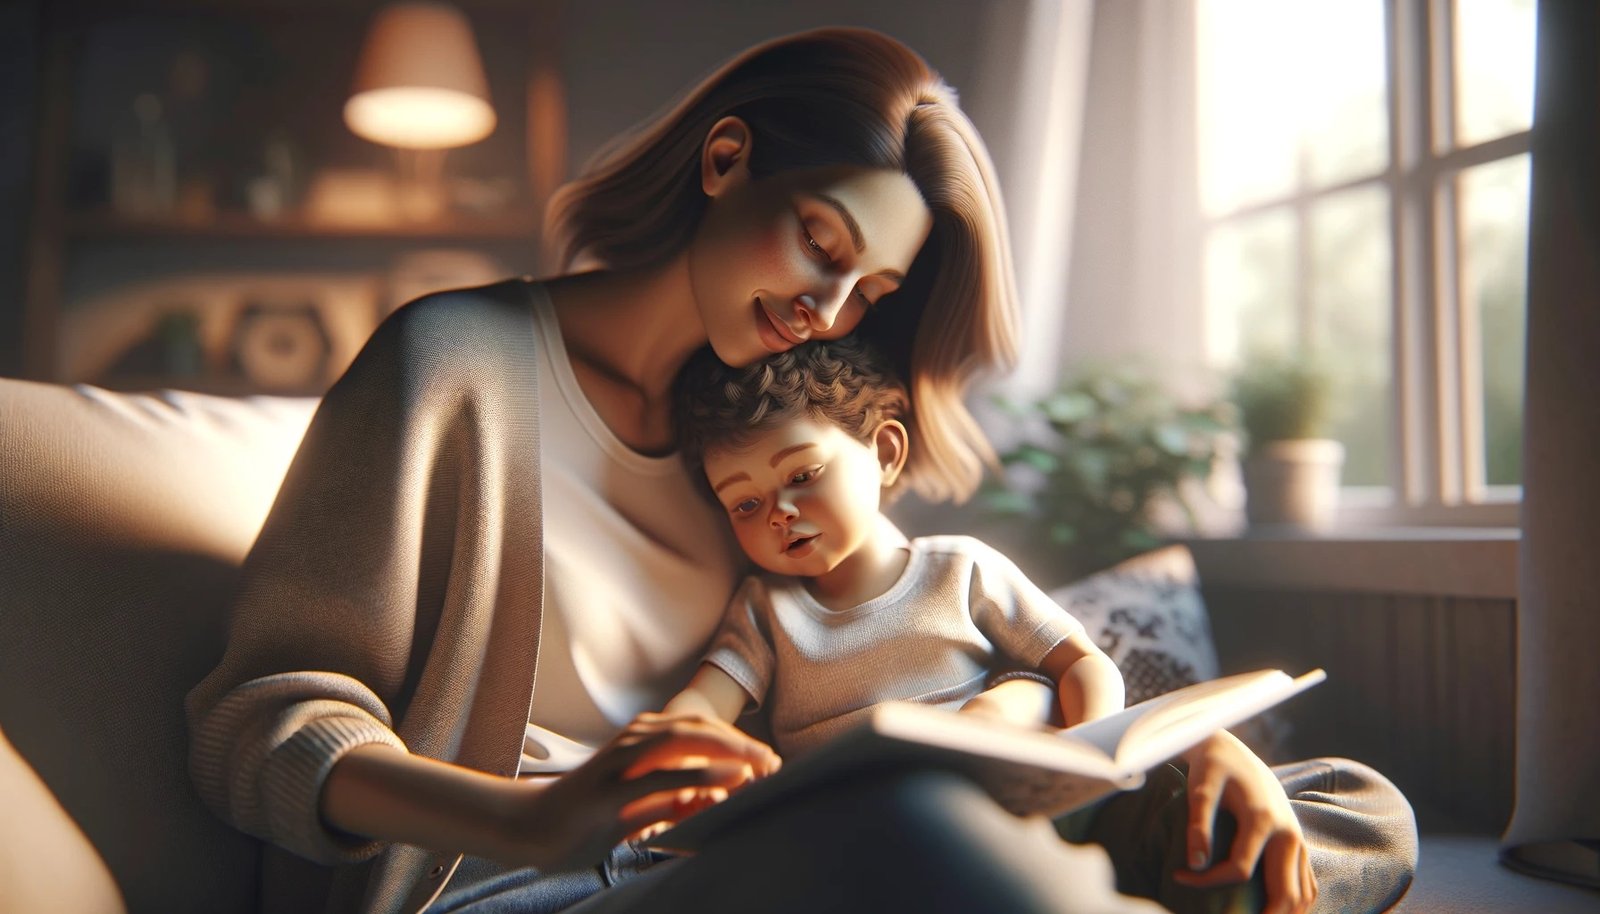 A mother snuggling and bonding with a child while reading a story together.